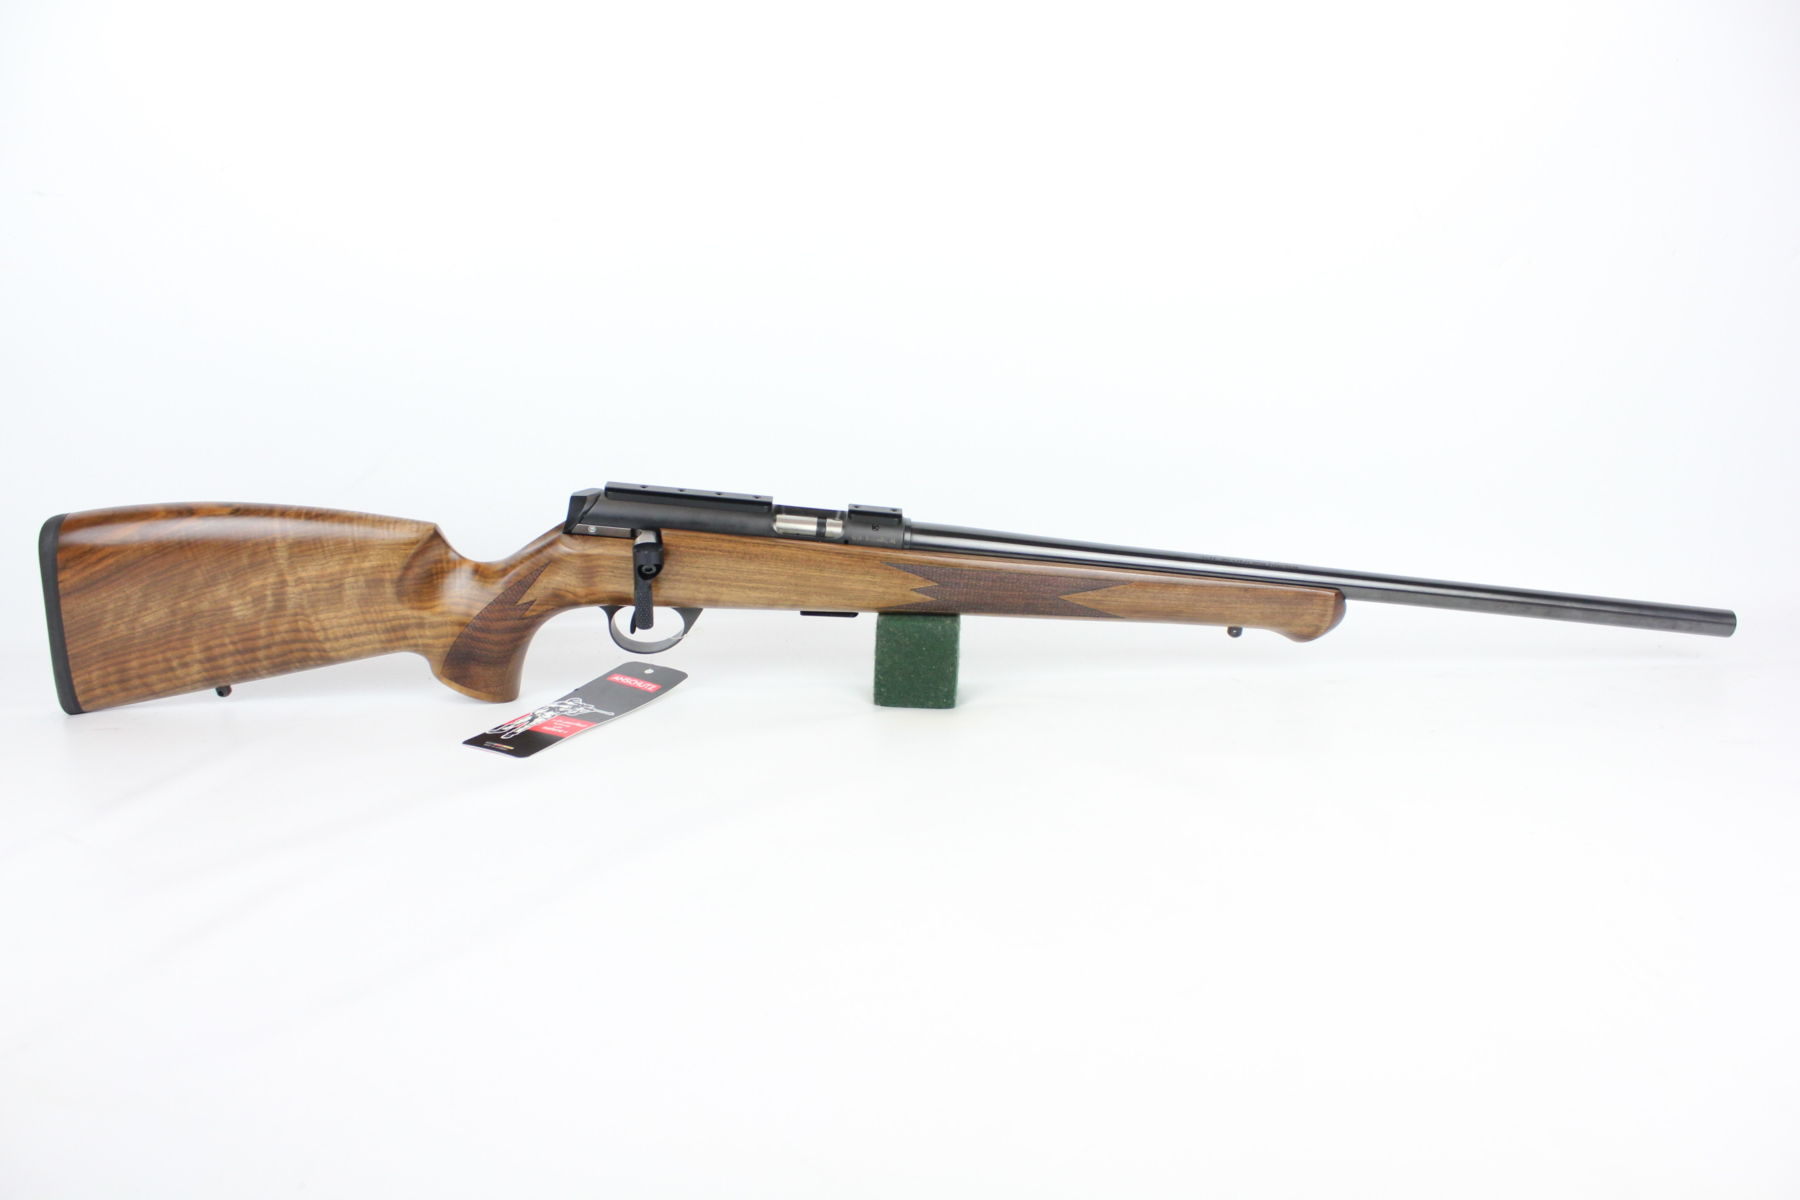 Anschutz 1727 F, chambered in .22 LR